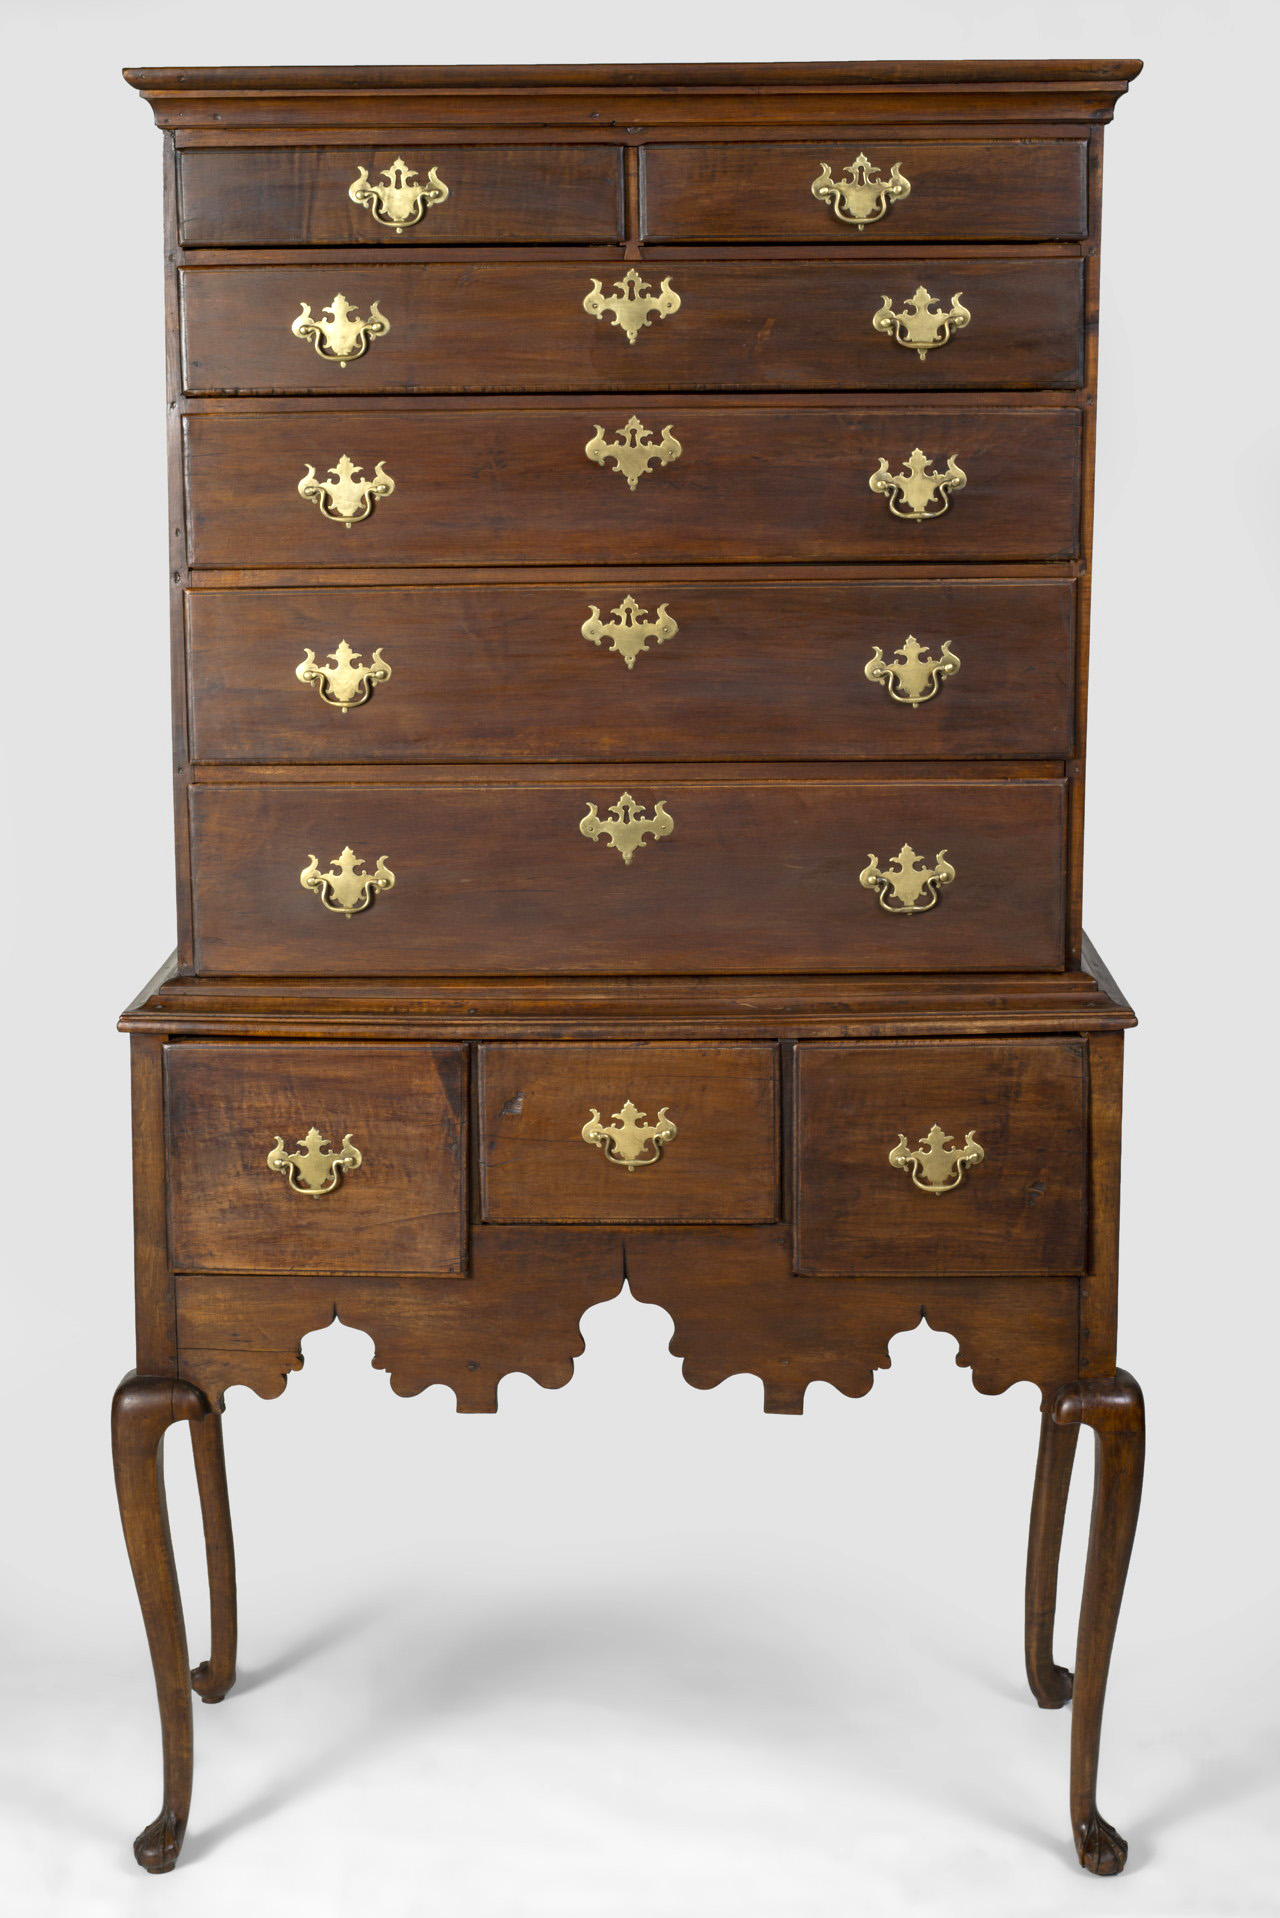 An early country Queen Anne high chest